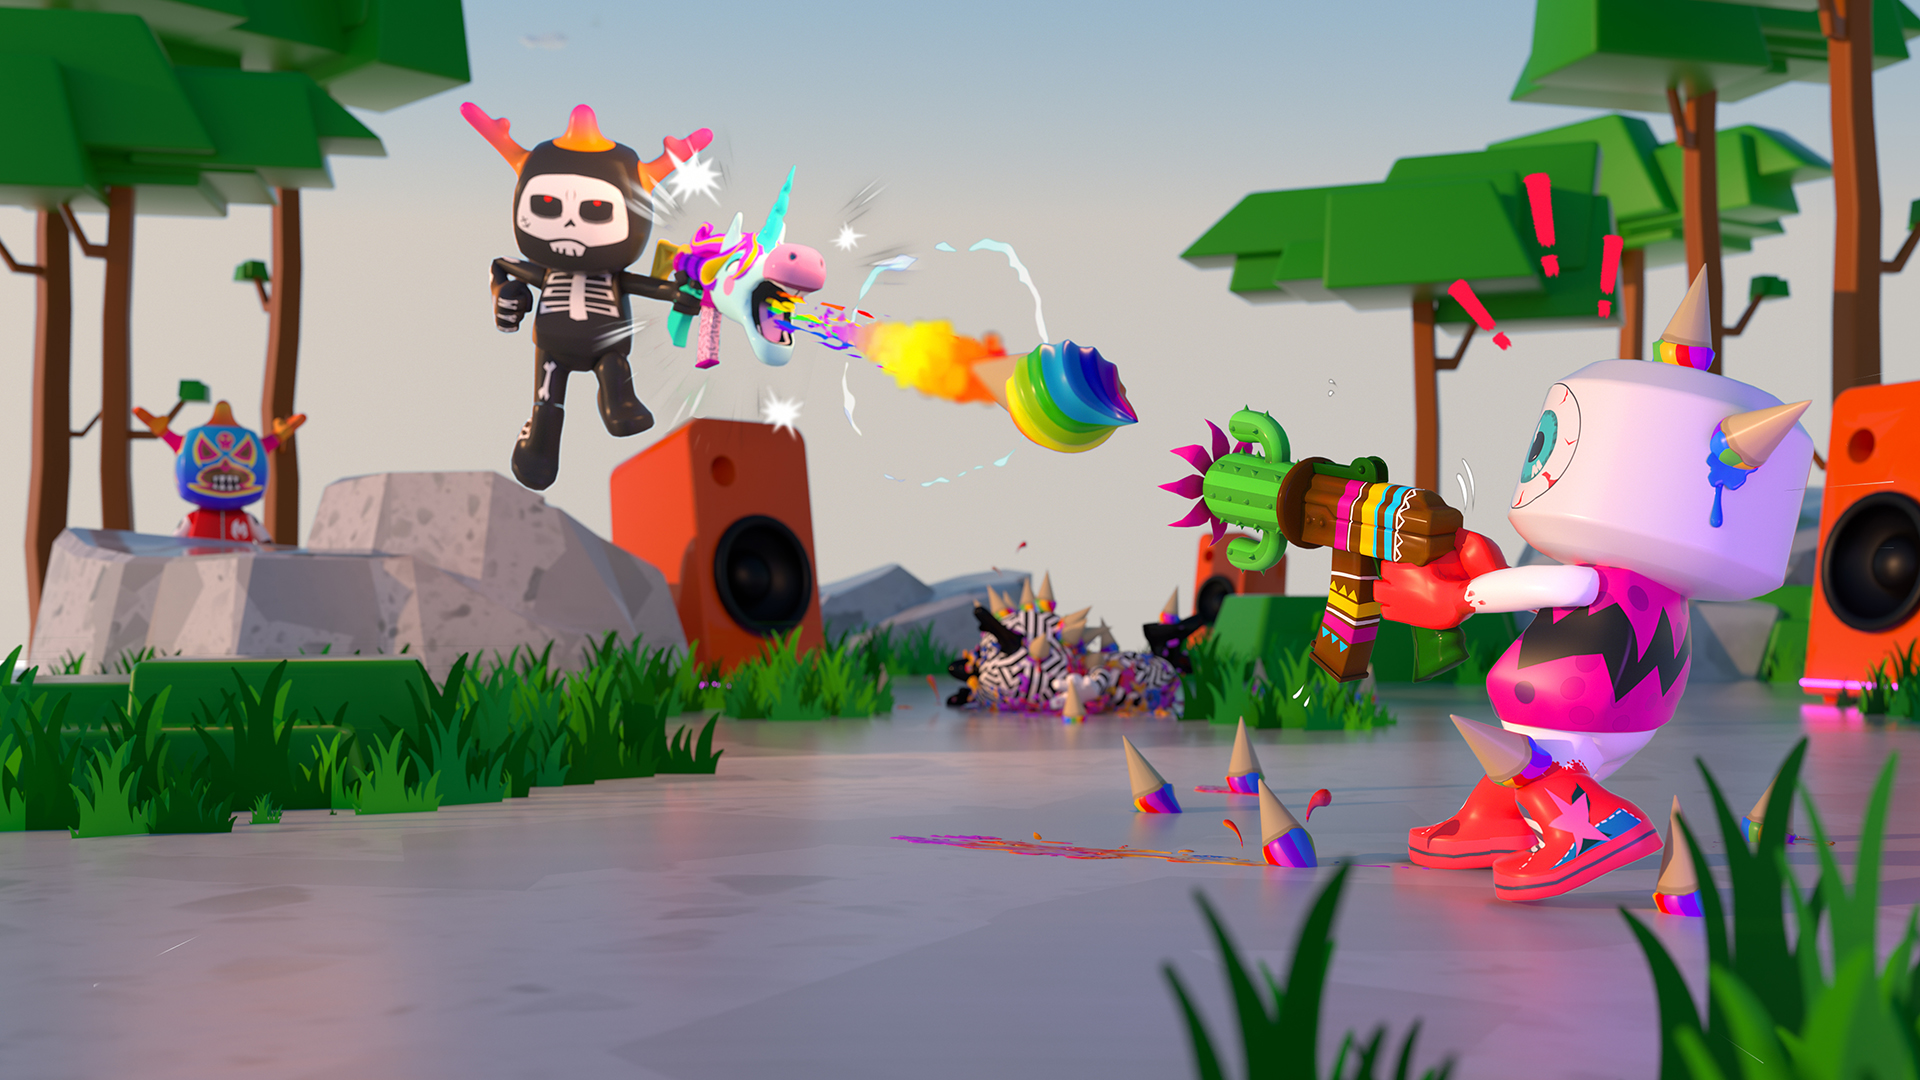 Blankos Block Party Is A Vibrant New Mmo Where Vinyl Toys Come To